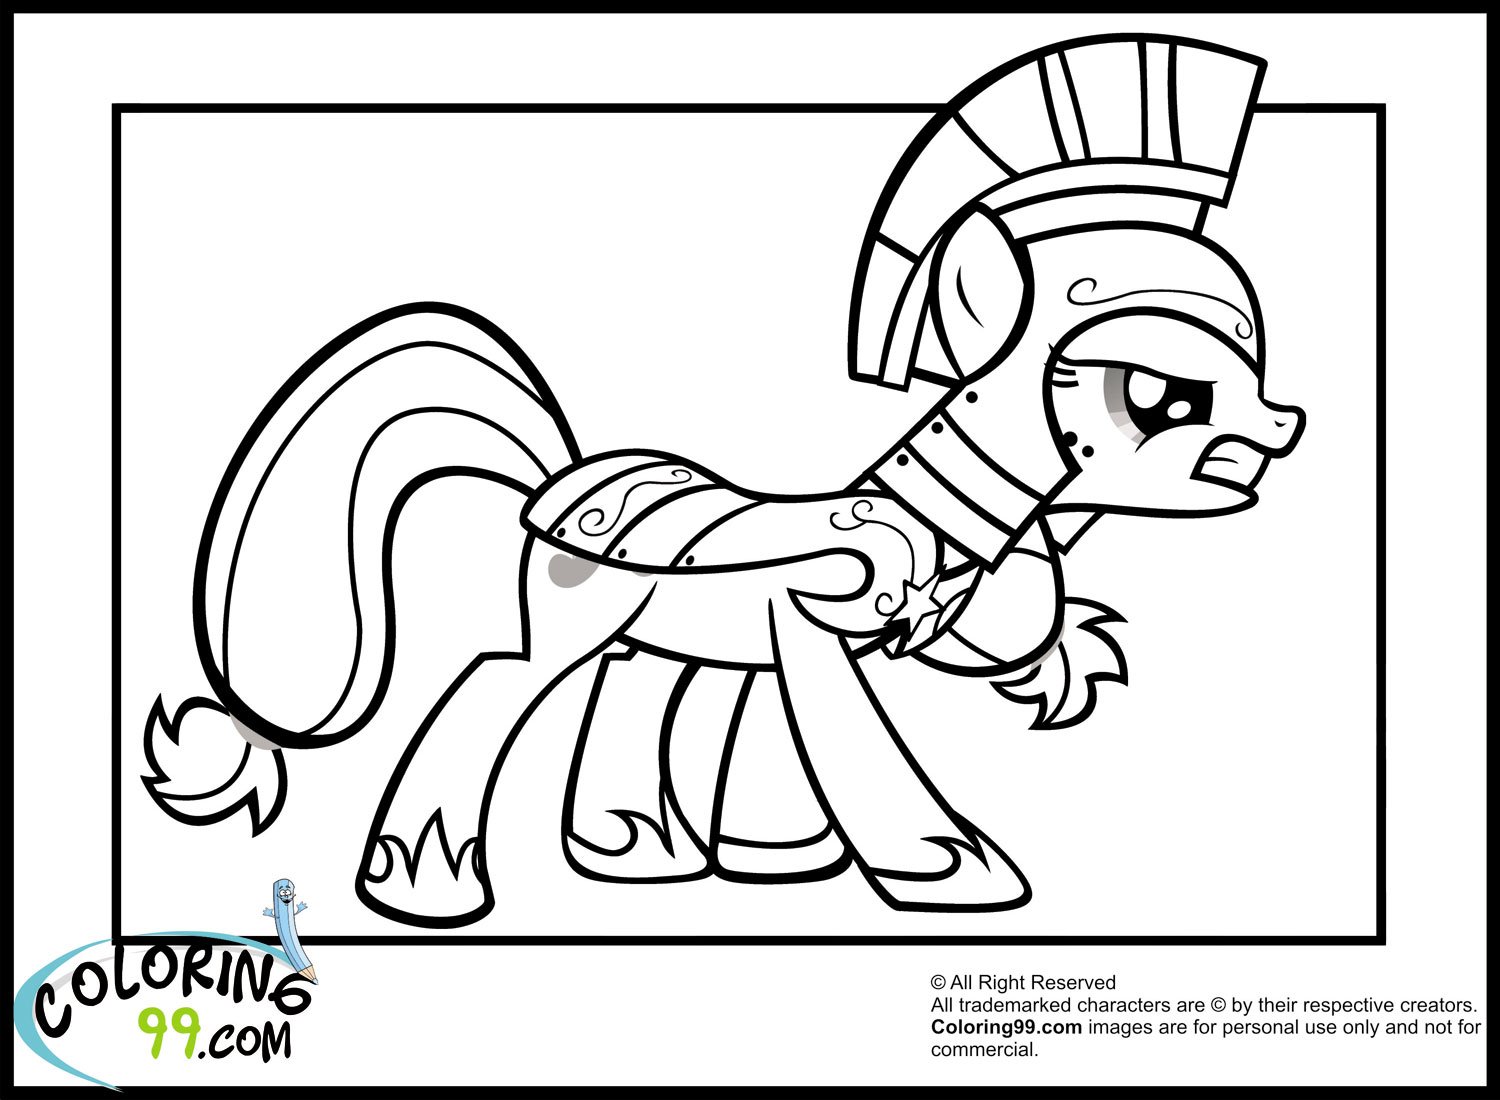 My Little Pony Applejack Coloring Pages Team colors